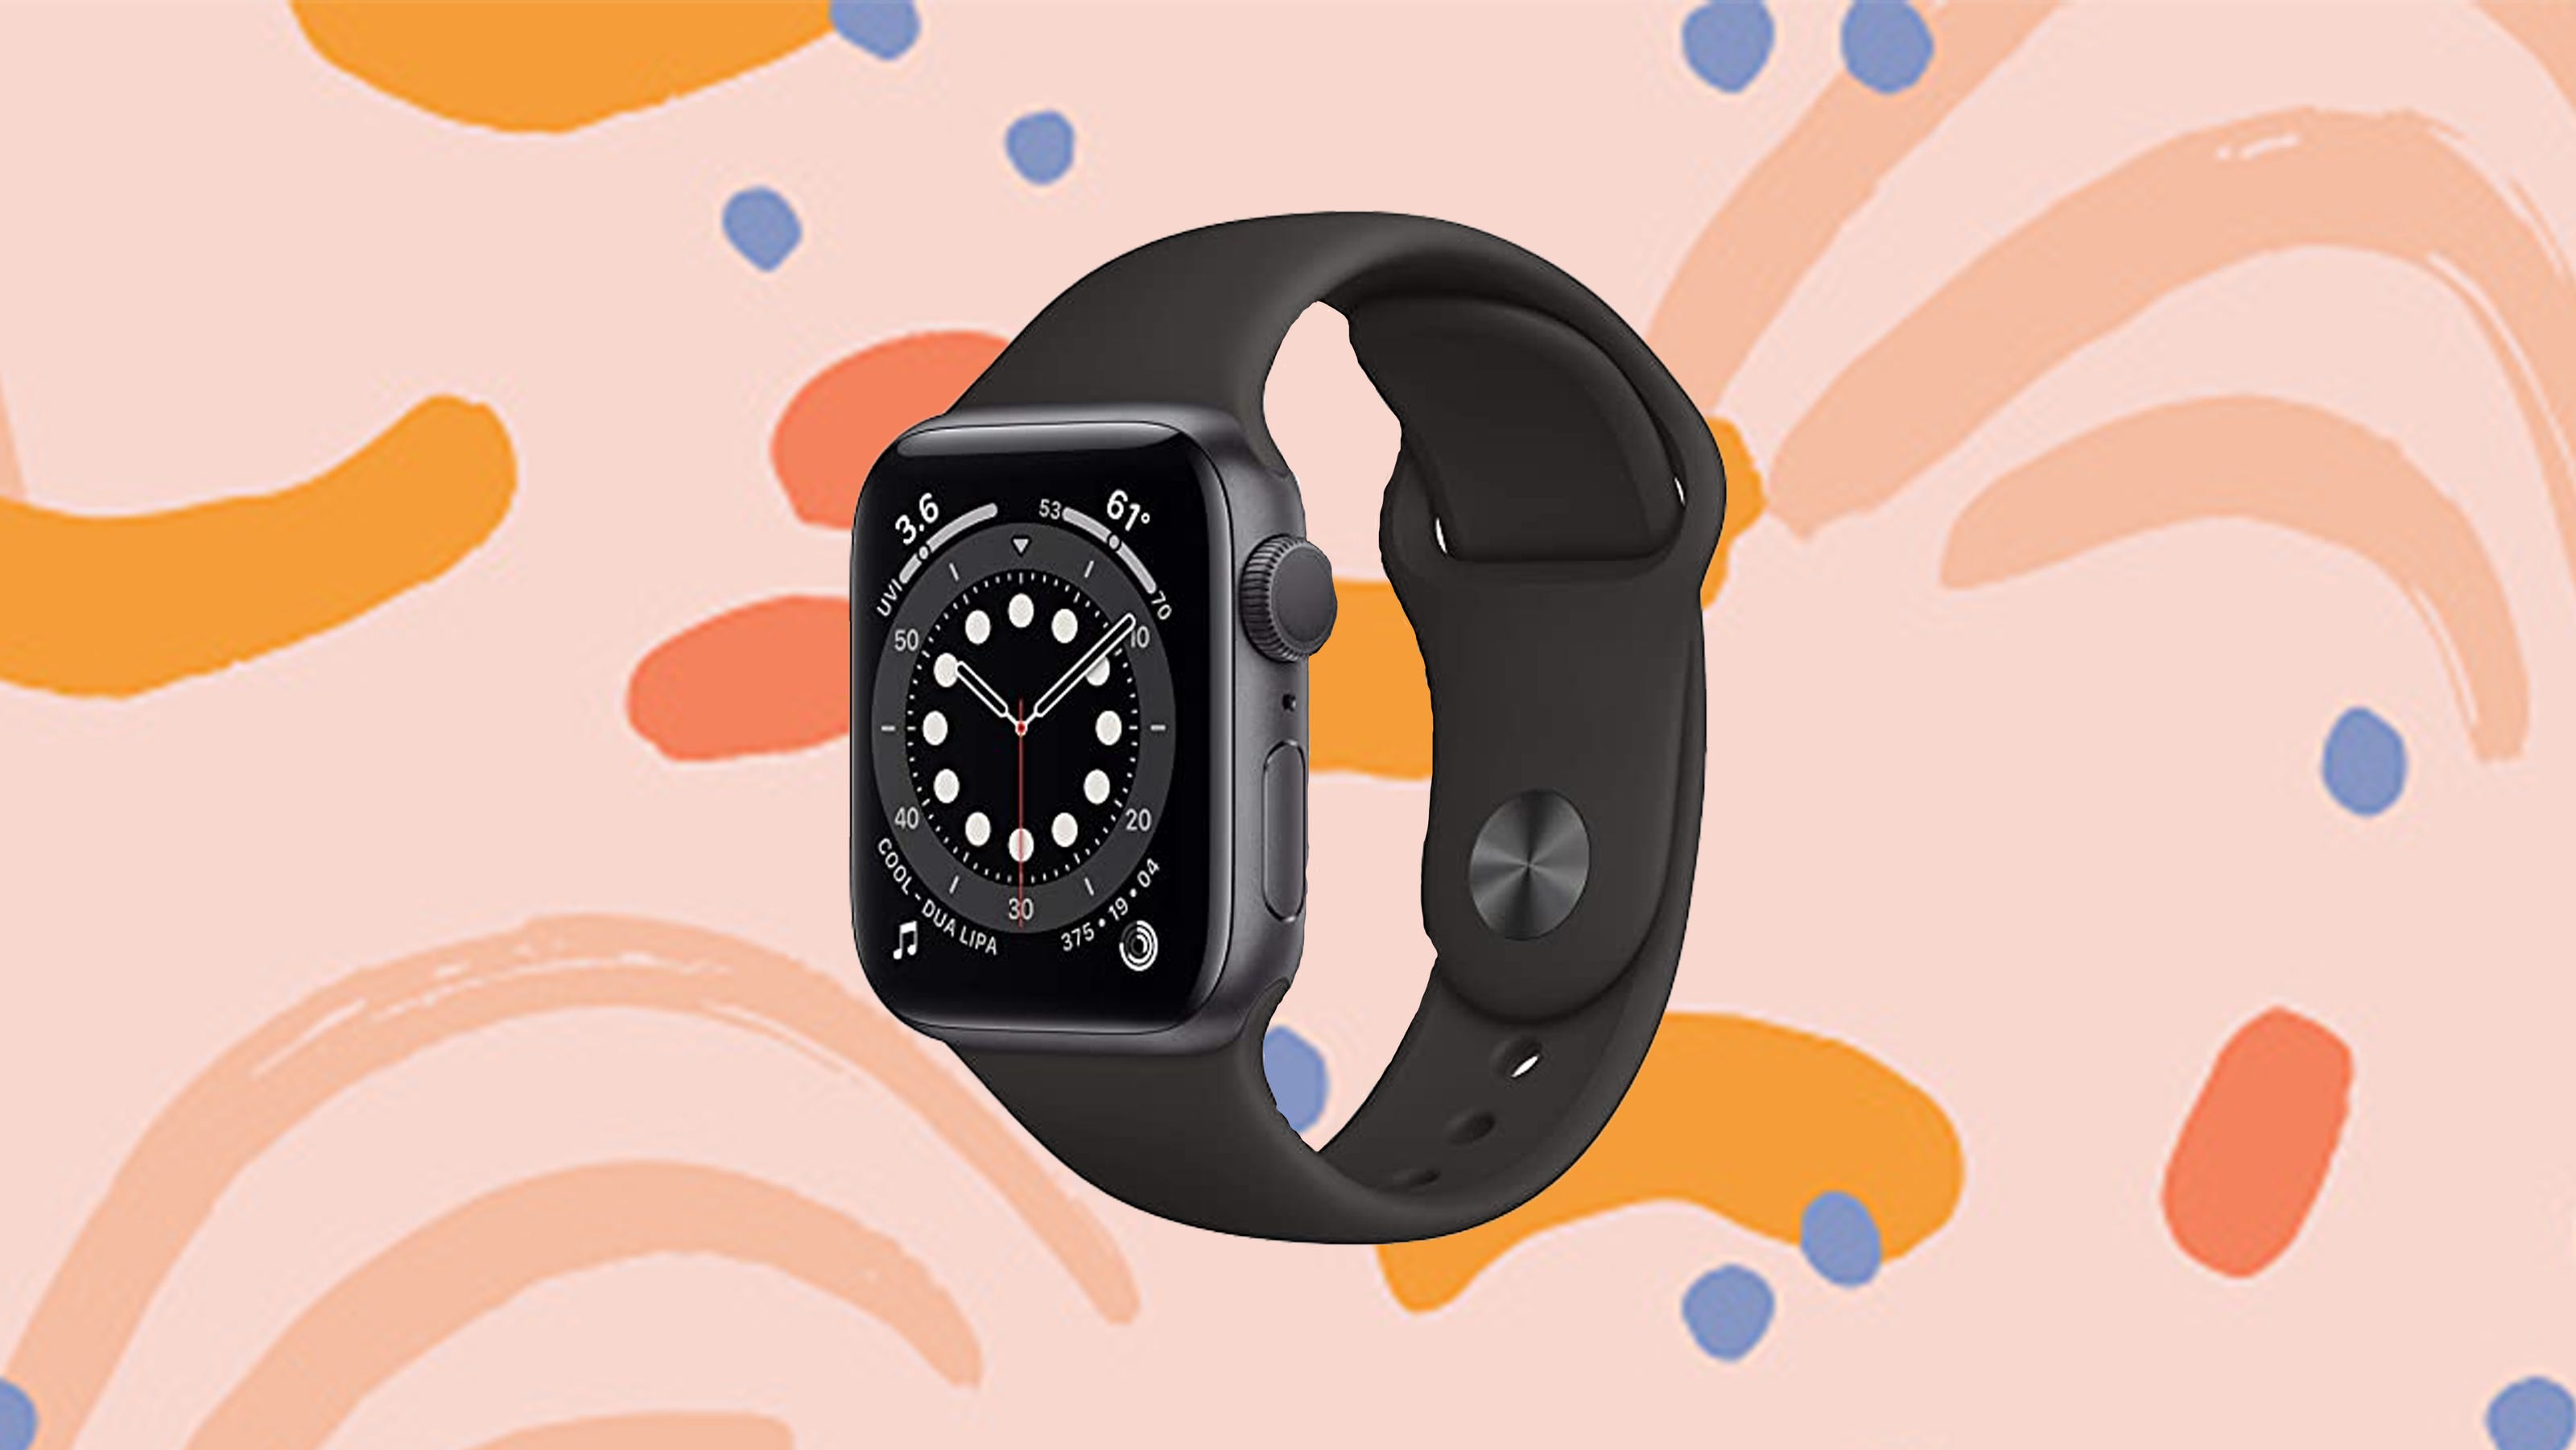 Apple Watch Series 6: Get the brand's latest smartwatch model on sale